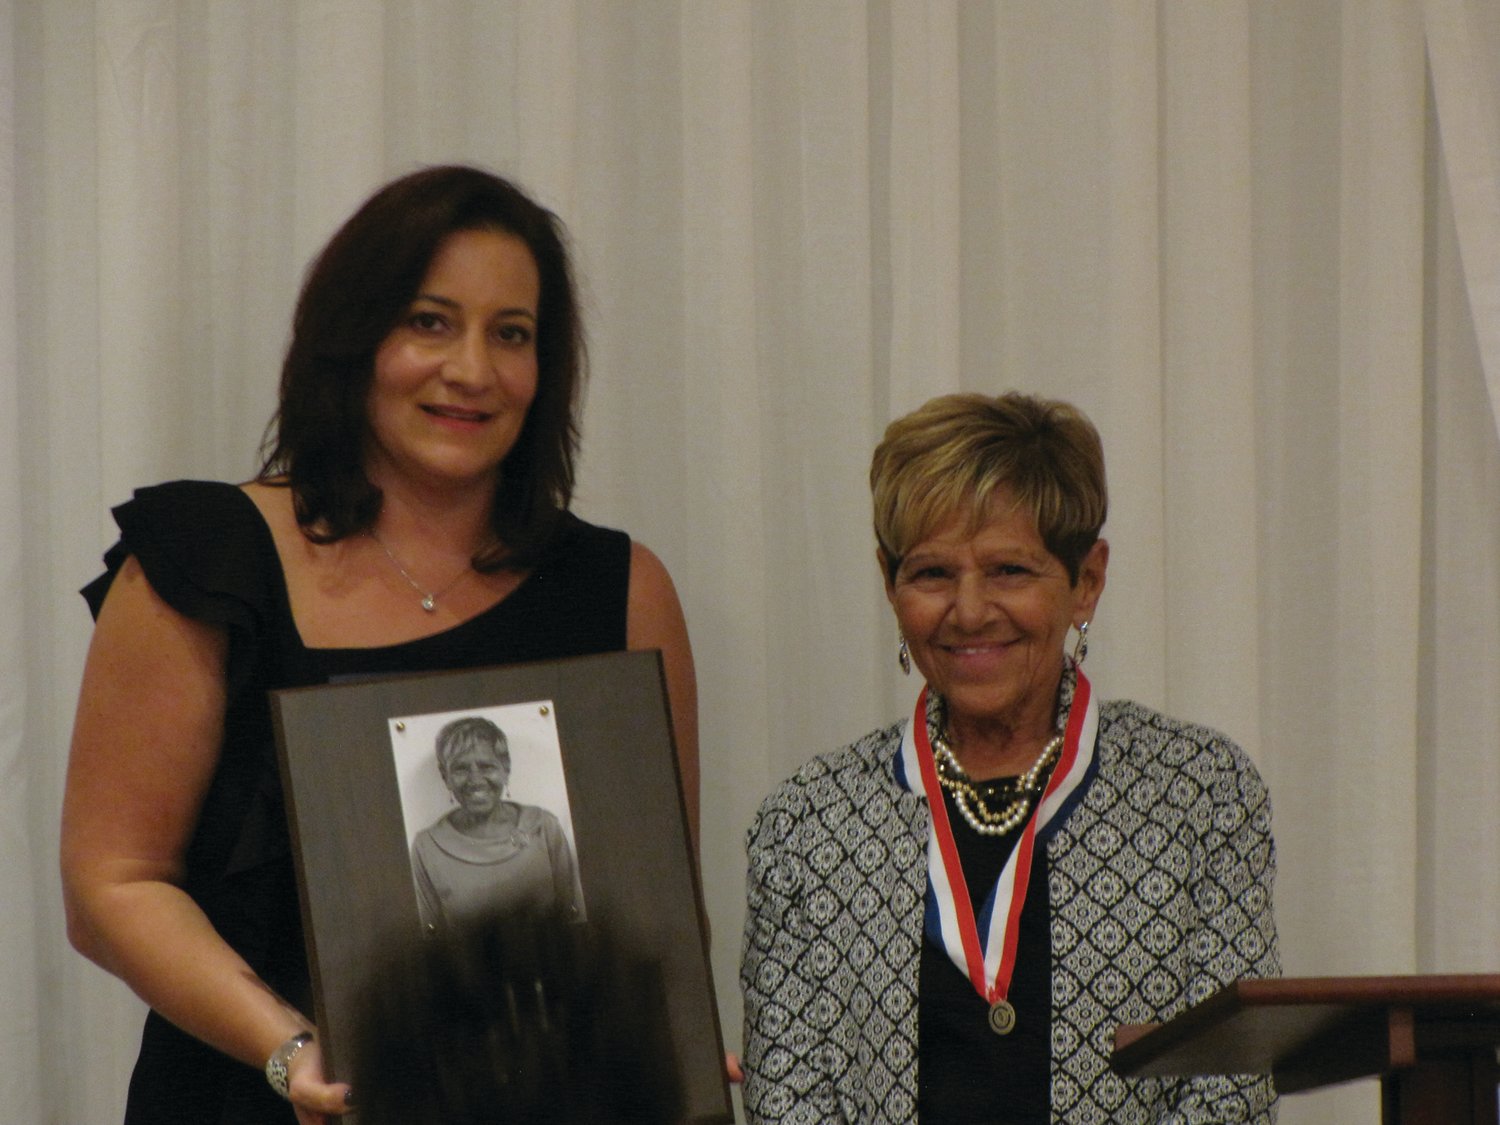 A LASTING HONOR: Doreen Holmes, right, shares a moment with Cranston Superintendent Jeannine Nota-Masse after being inducted into the Cranston Hall of Fame. Holmes